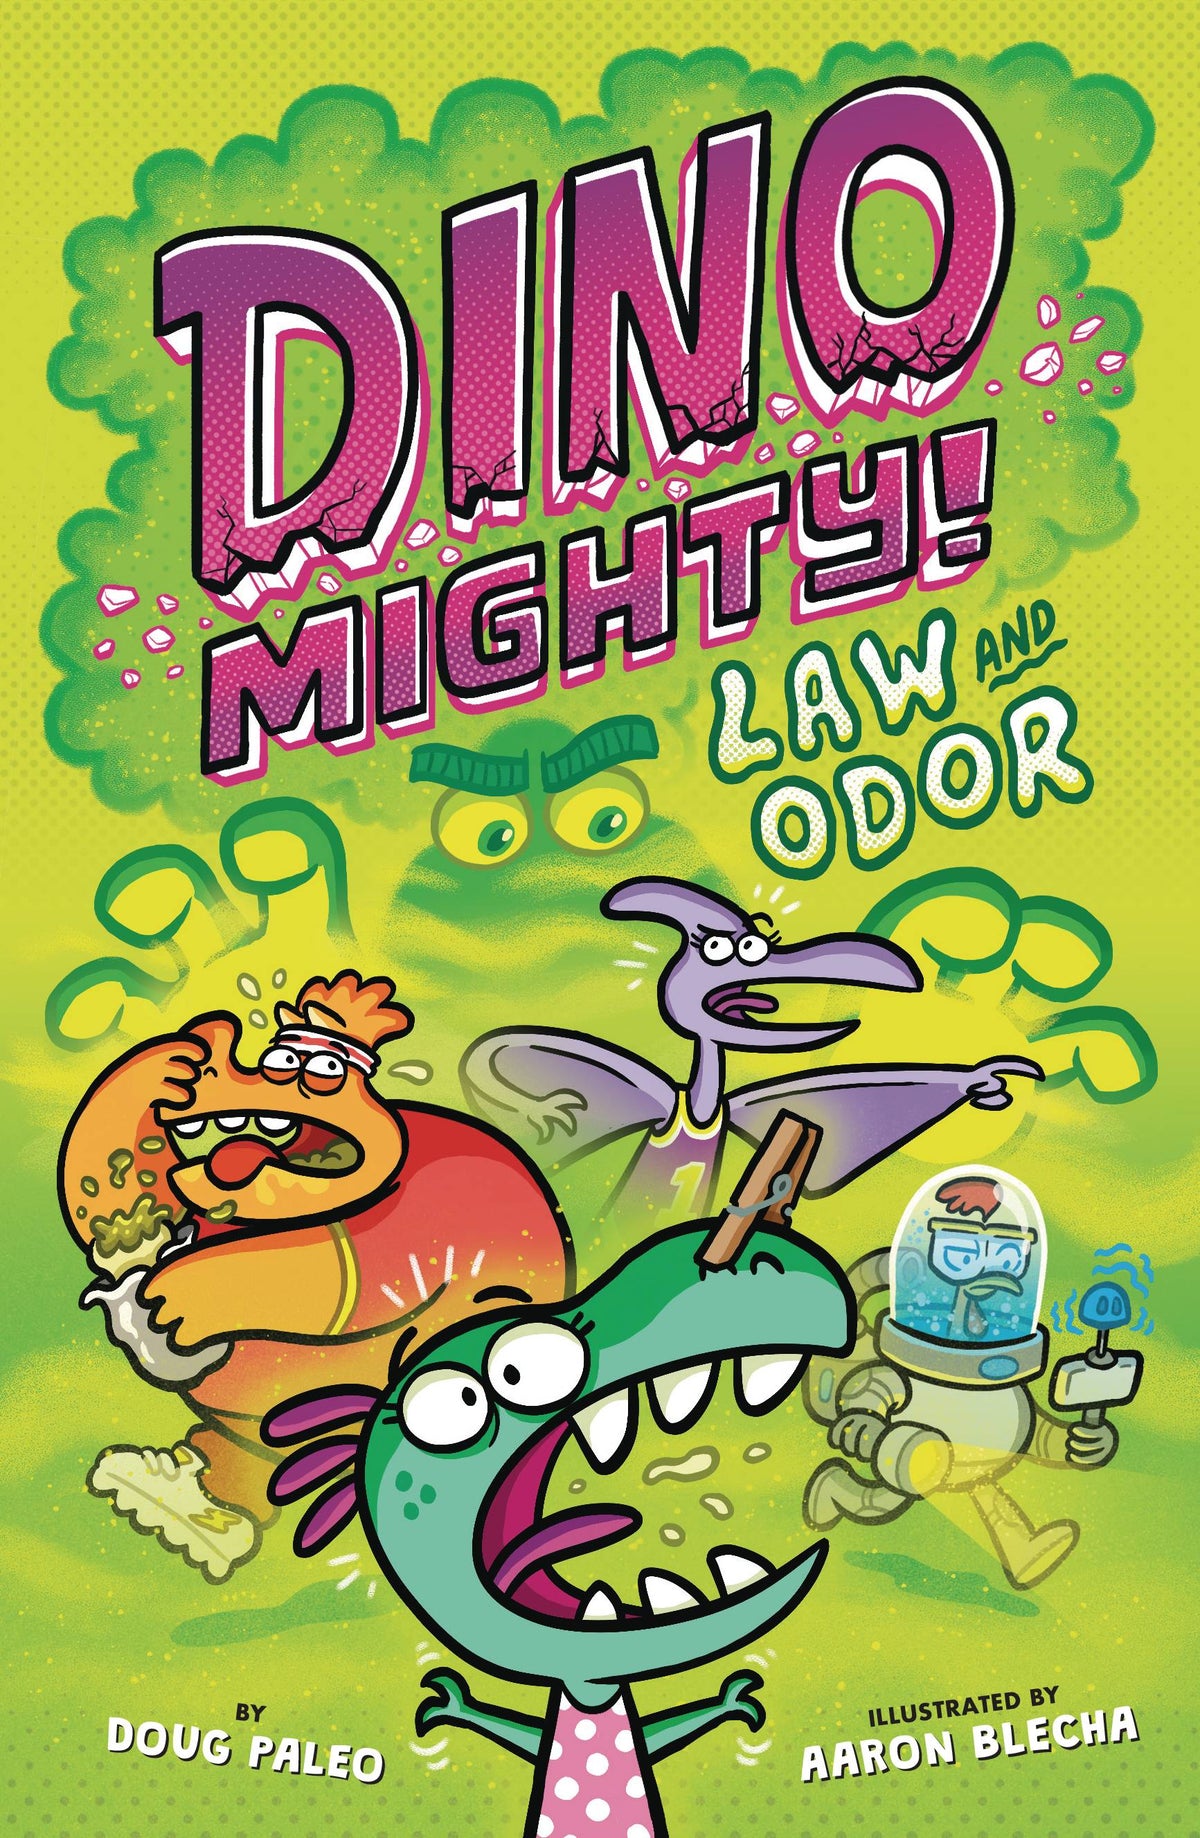 DINO MIGHTY GN VOL 02 LAW AND ODOR - Third Eye